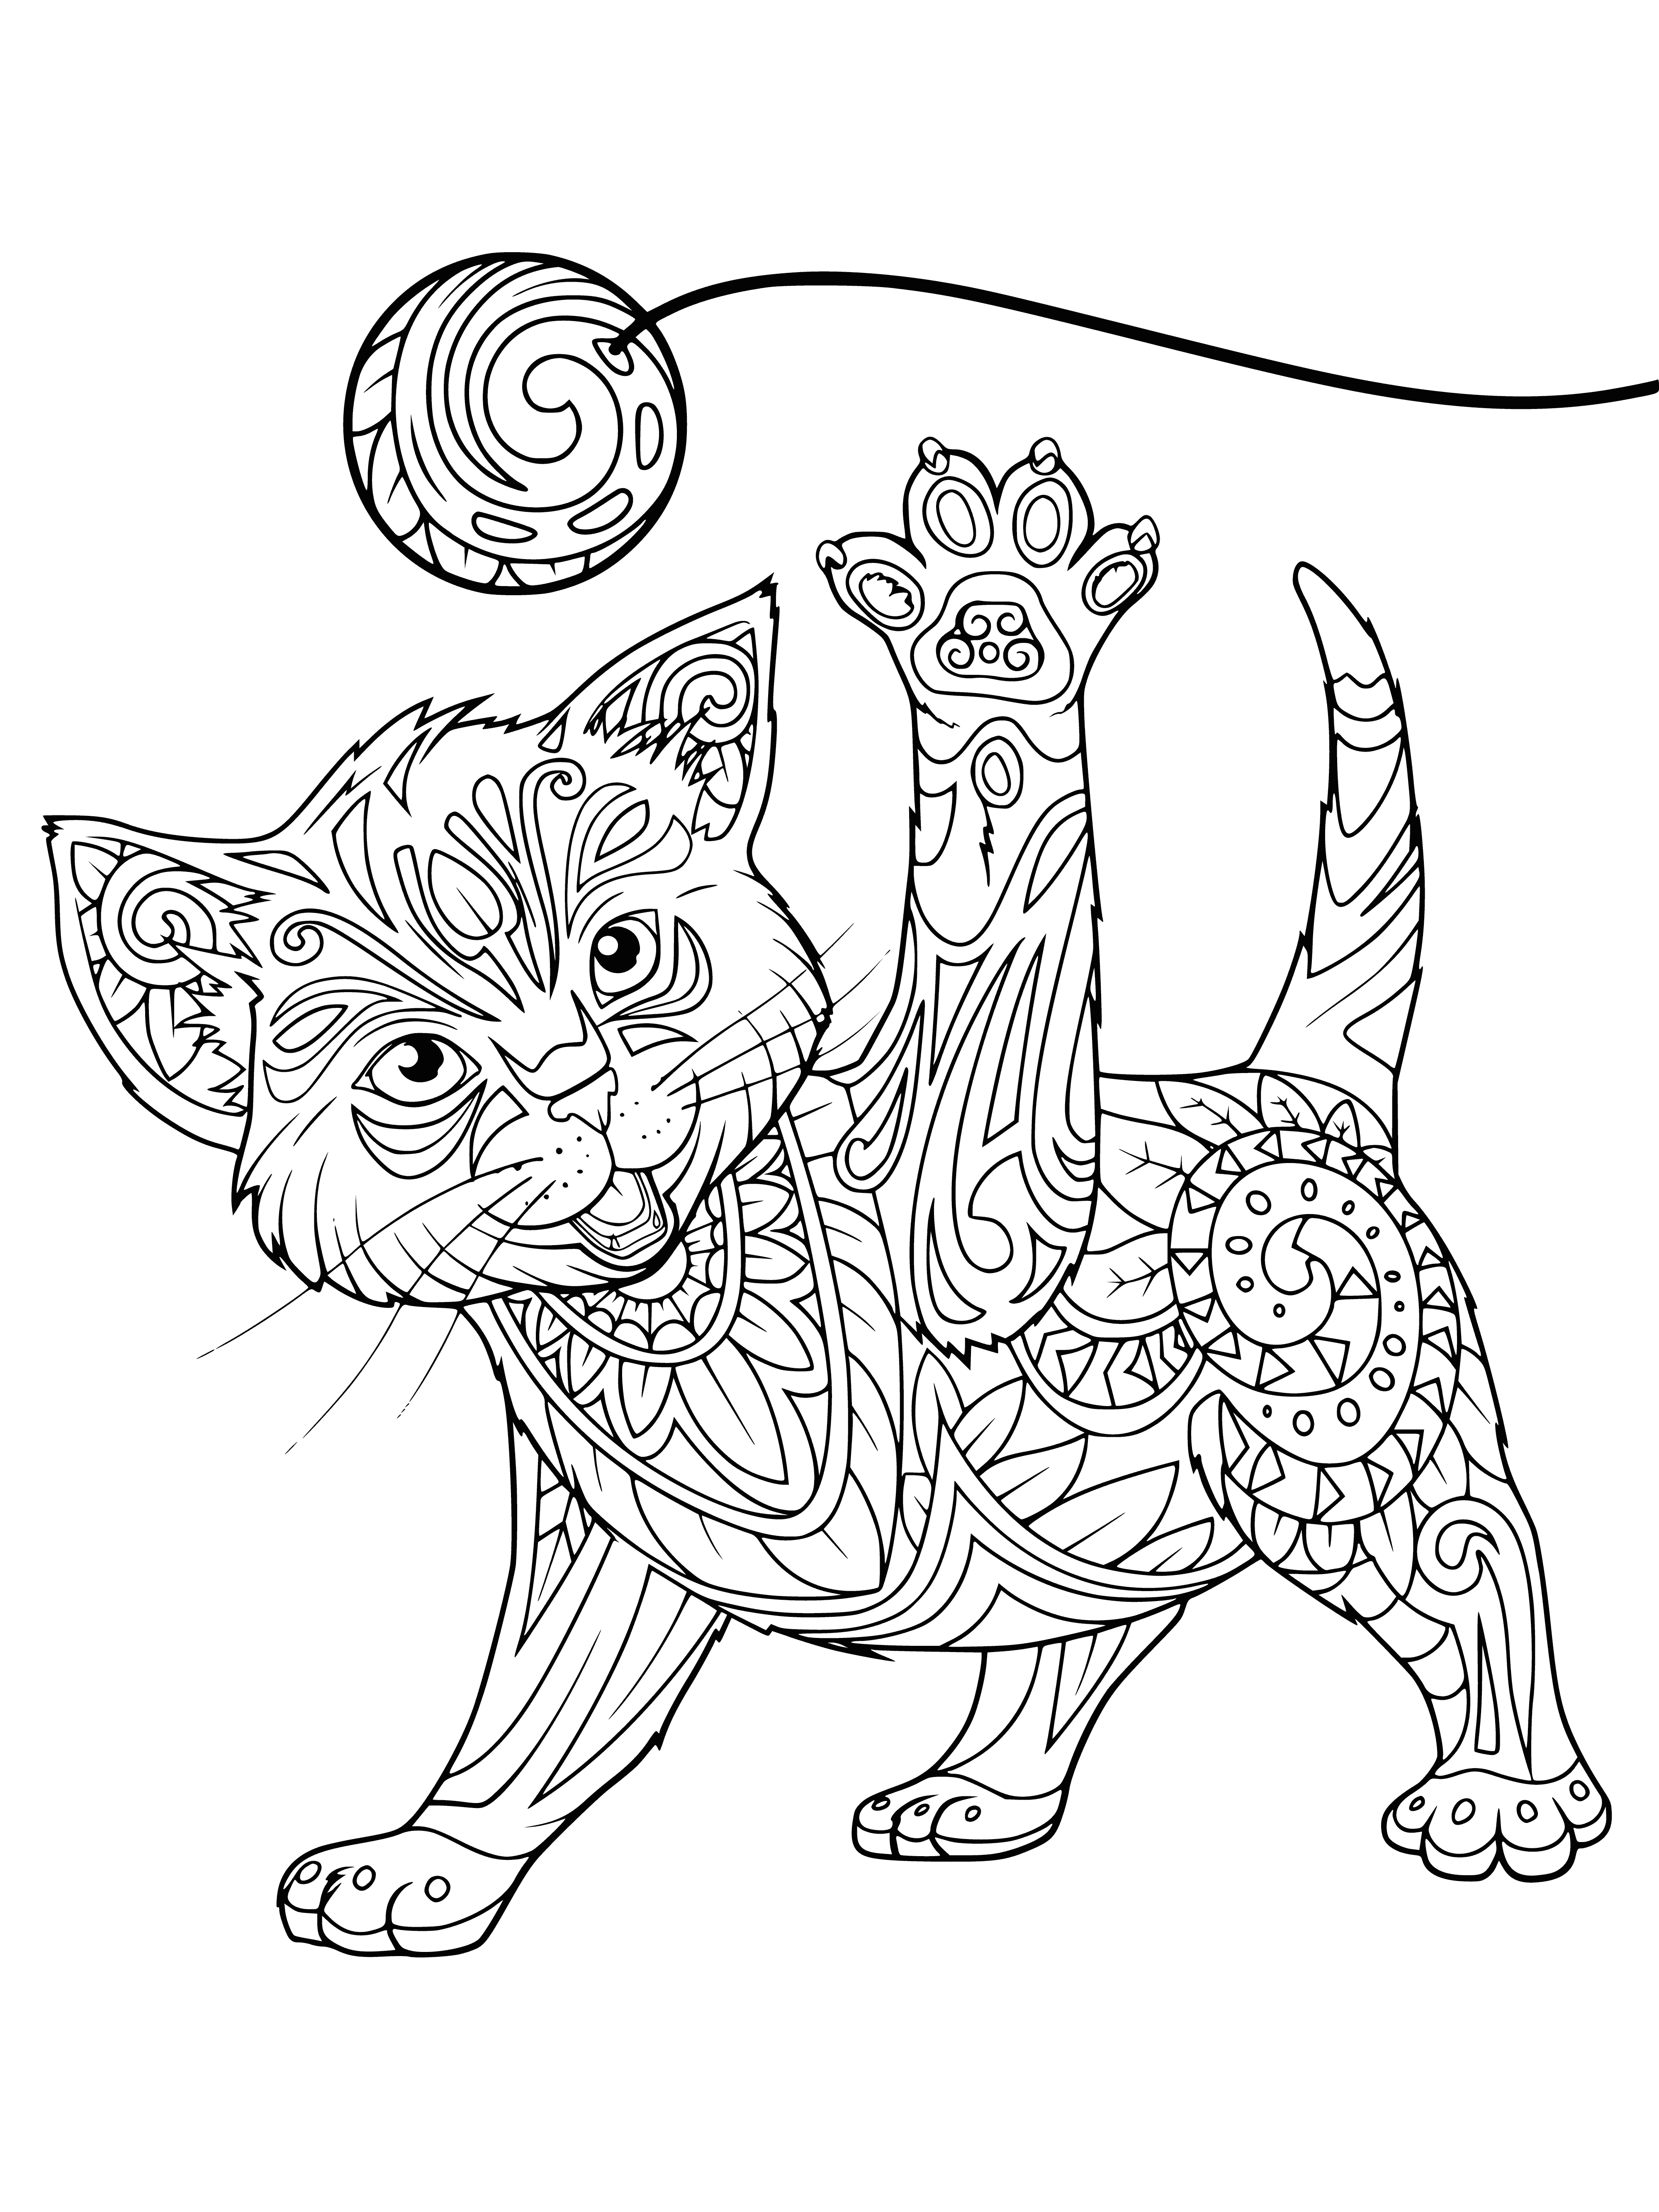 coloring page: Kitten plays with purple yarn ball, leaping and batting, soft pink fur, alert big eyes, against gradient of three blues. #kitten #yarn #fun #cute